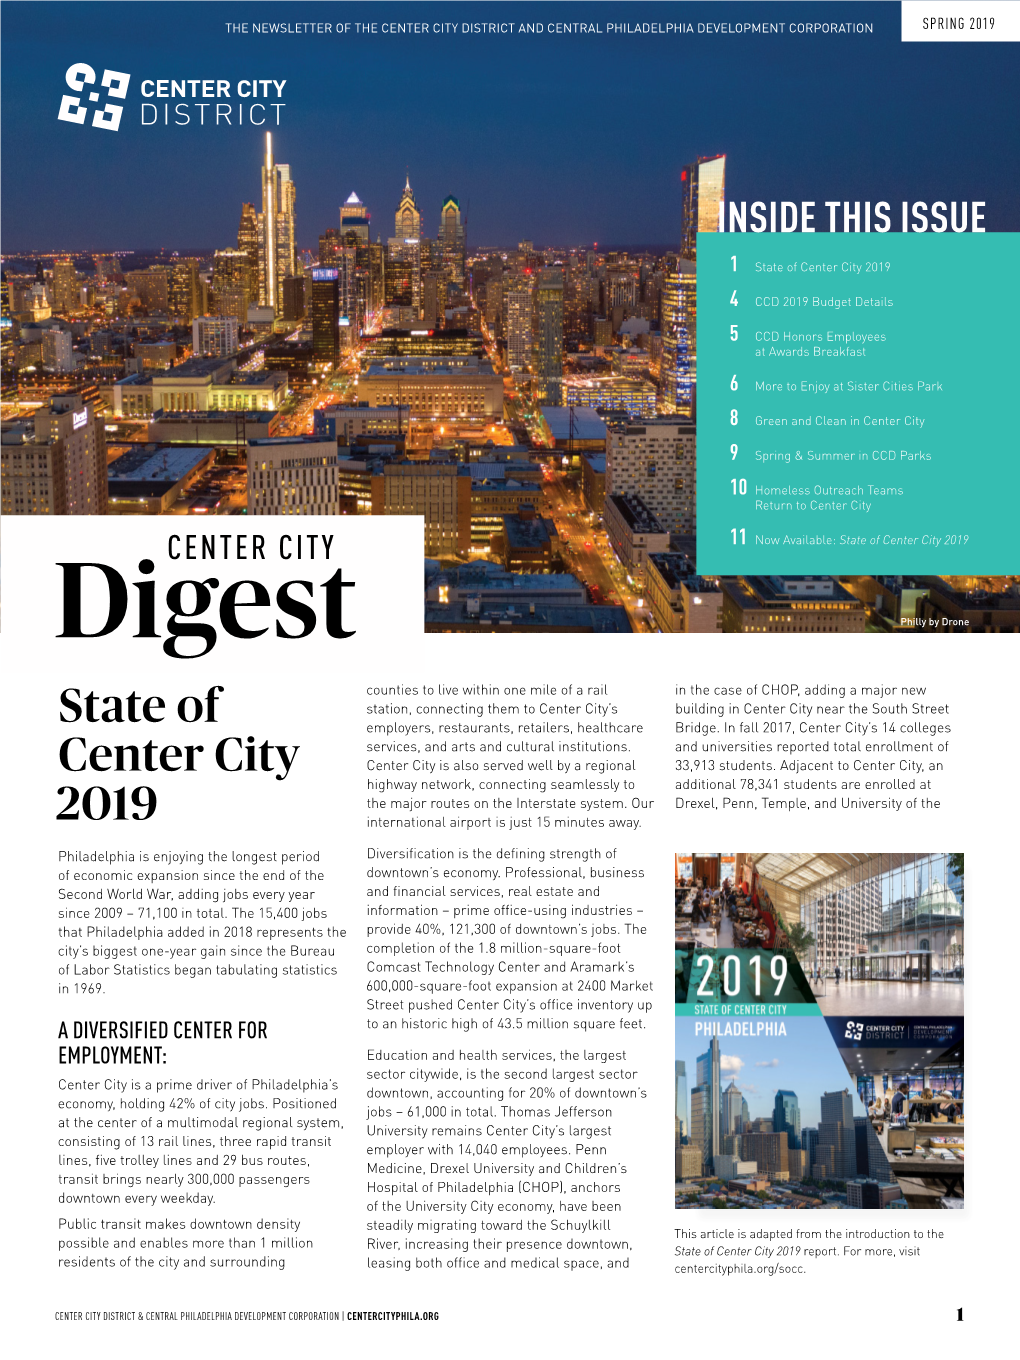 State of Center City 2019